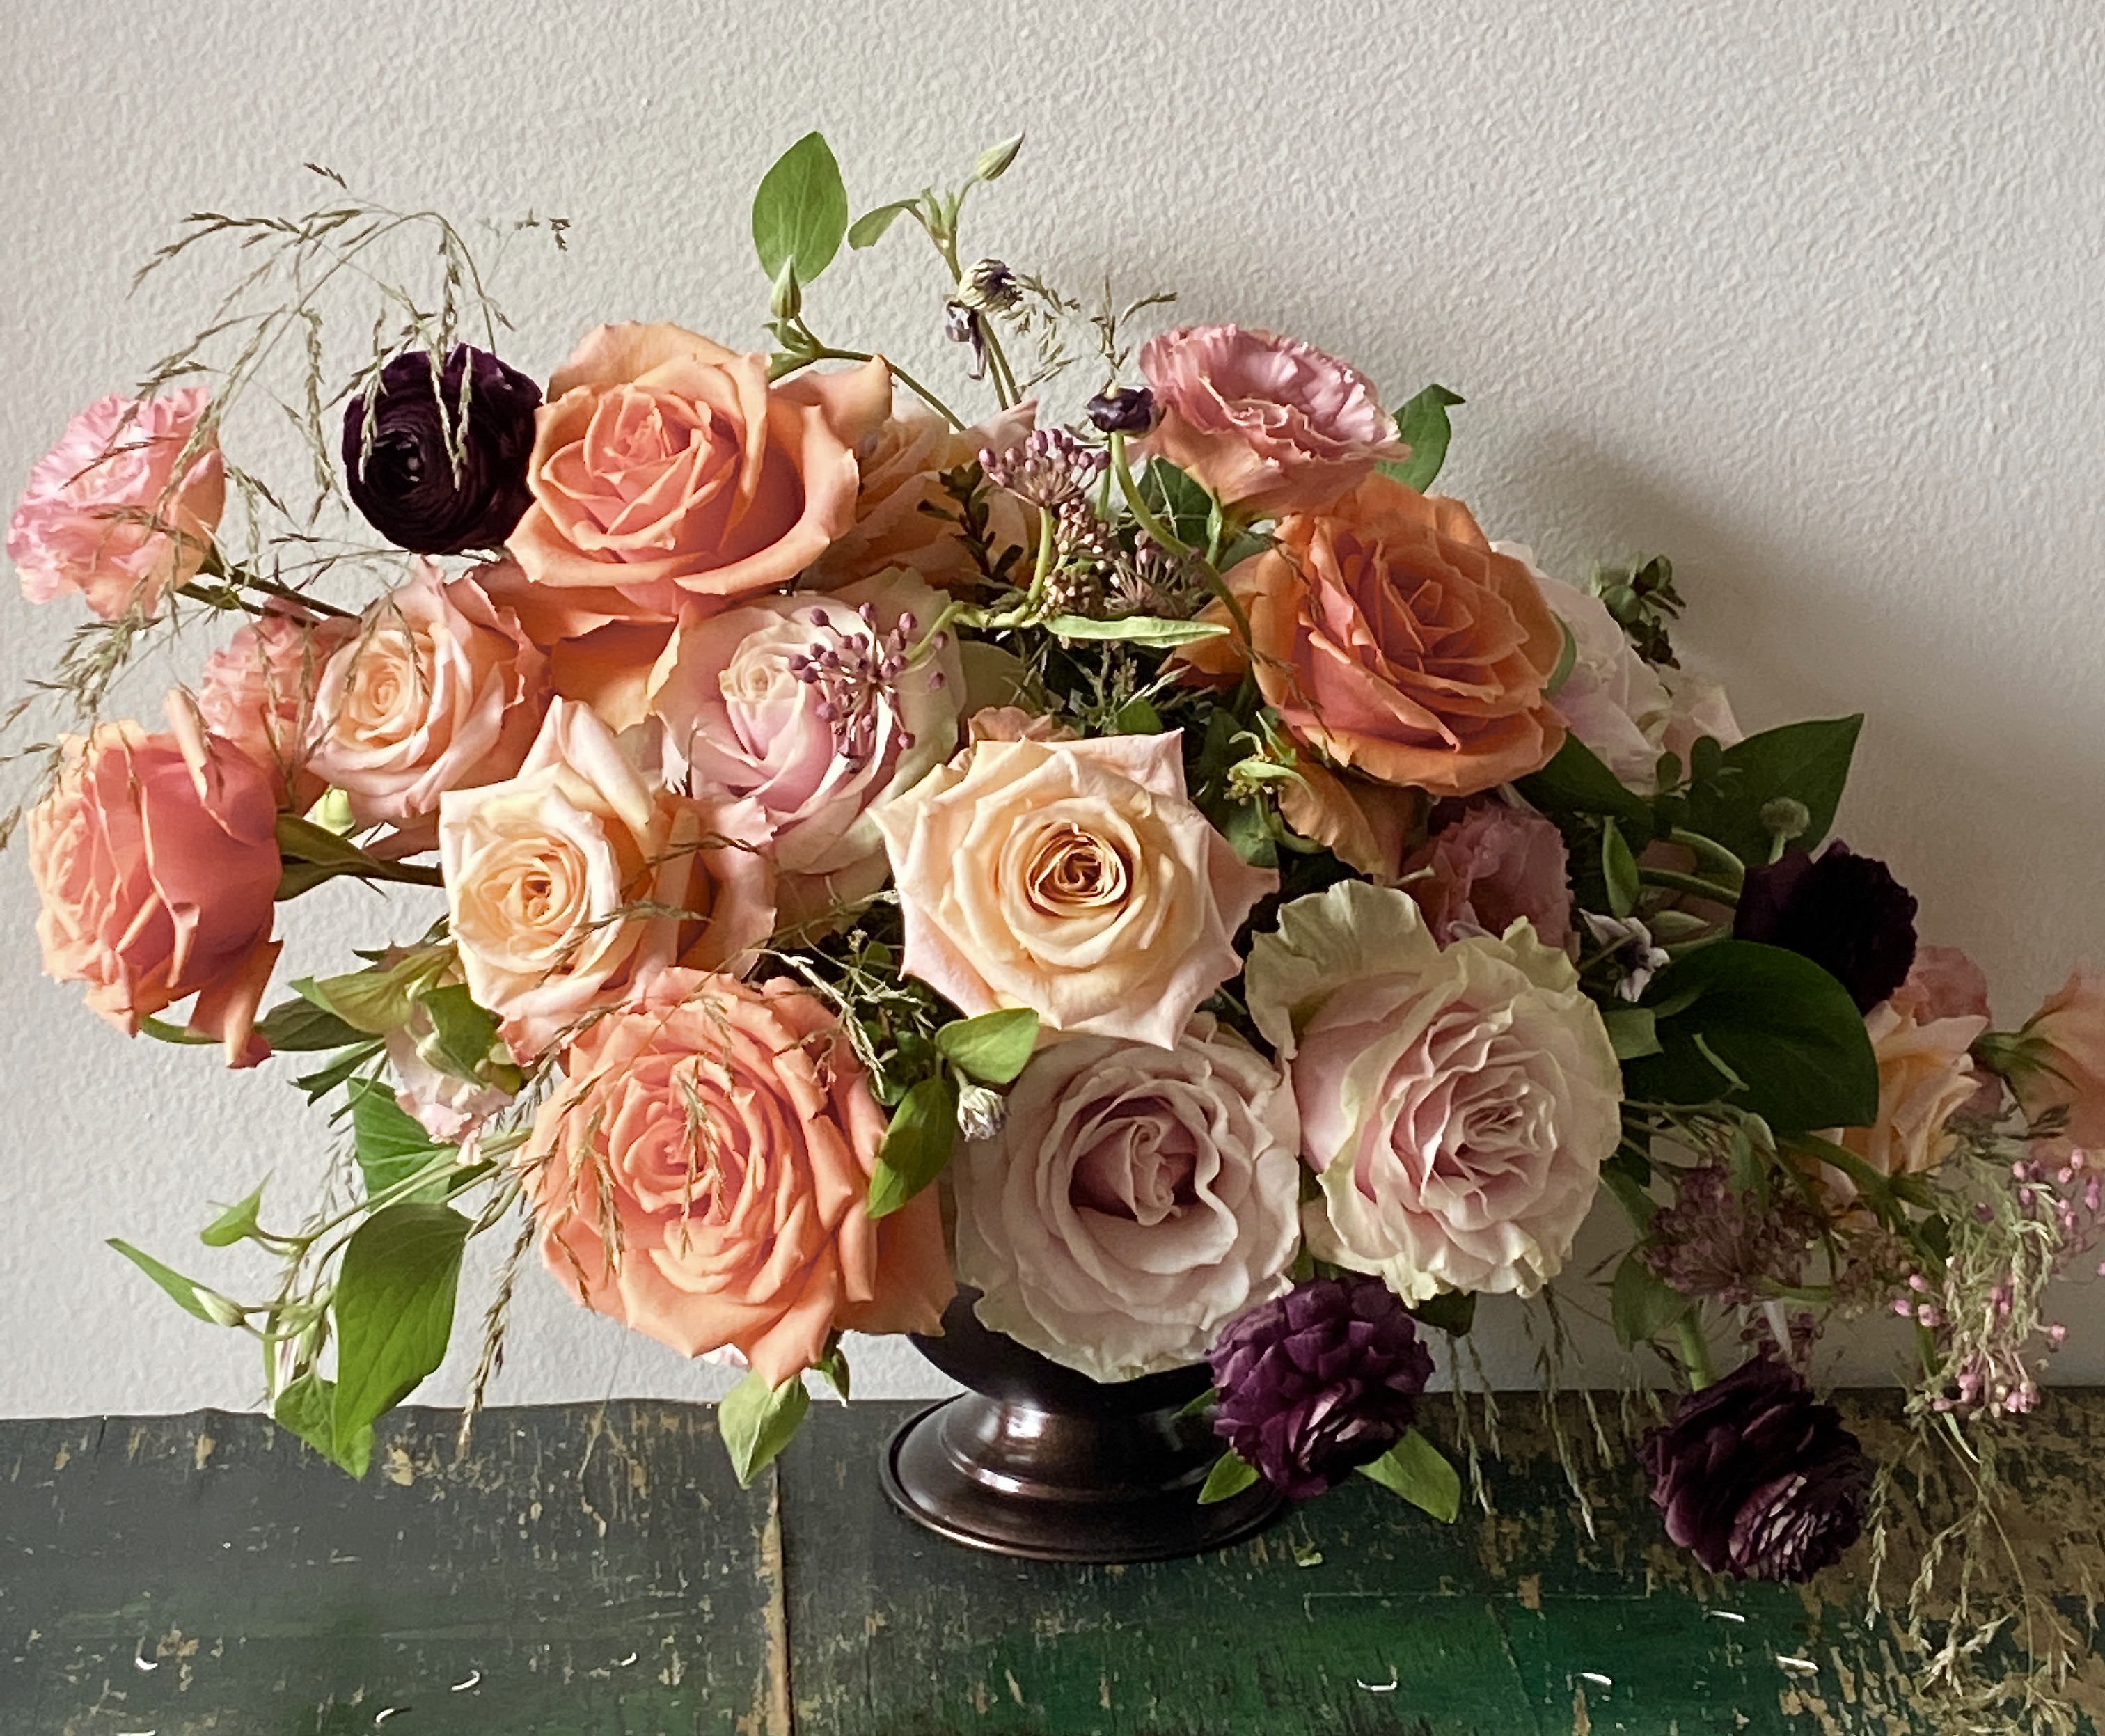 image of a rose floral arrangement featuring blush pink roses